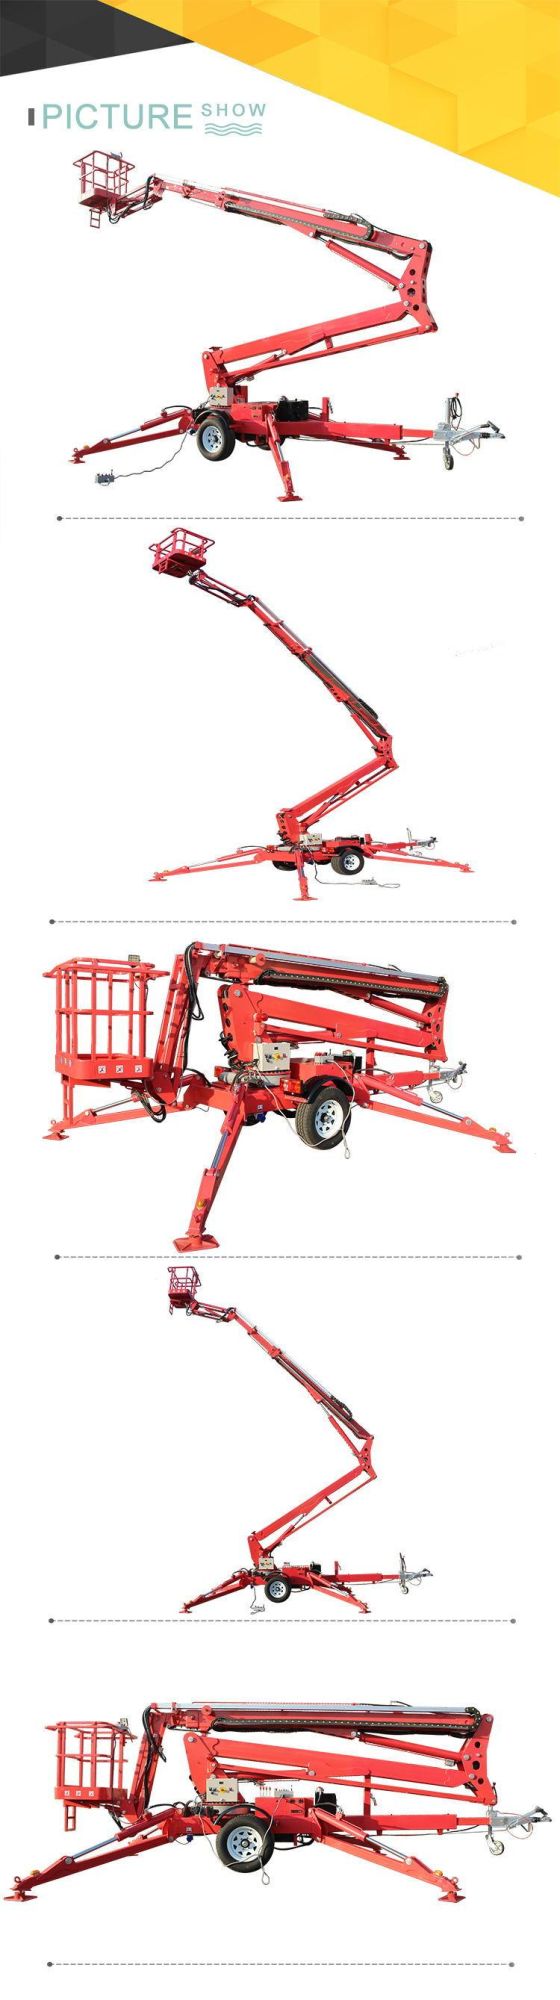 Scafold Replacer High Efficiency Spider Lift Articulating Boom Lift